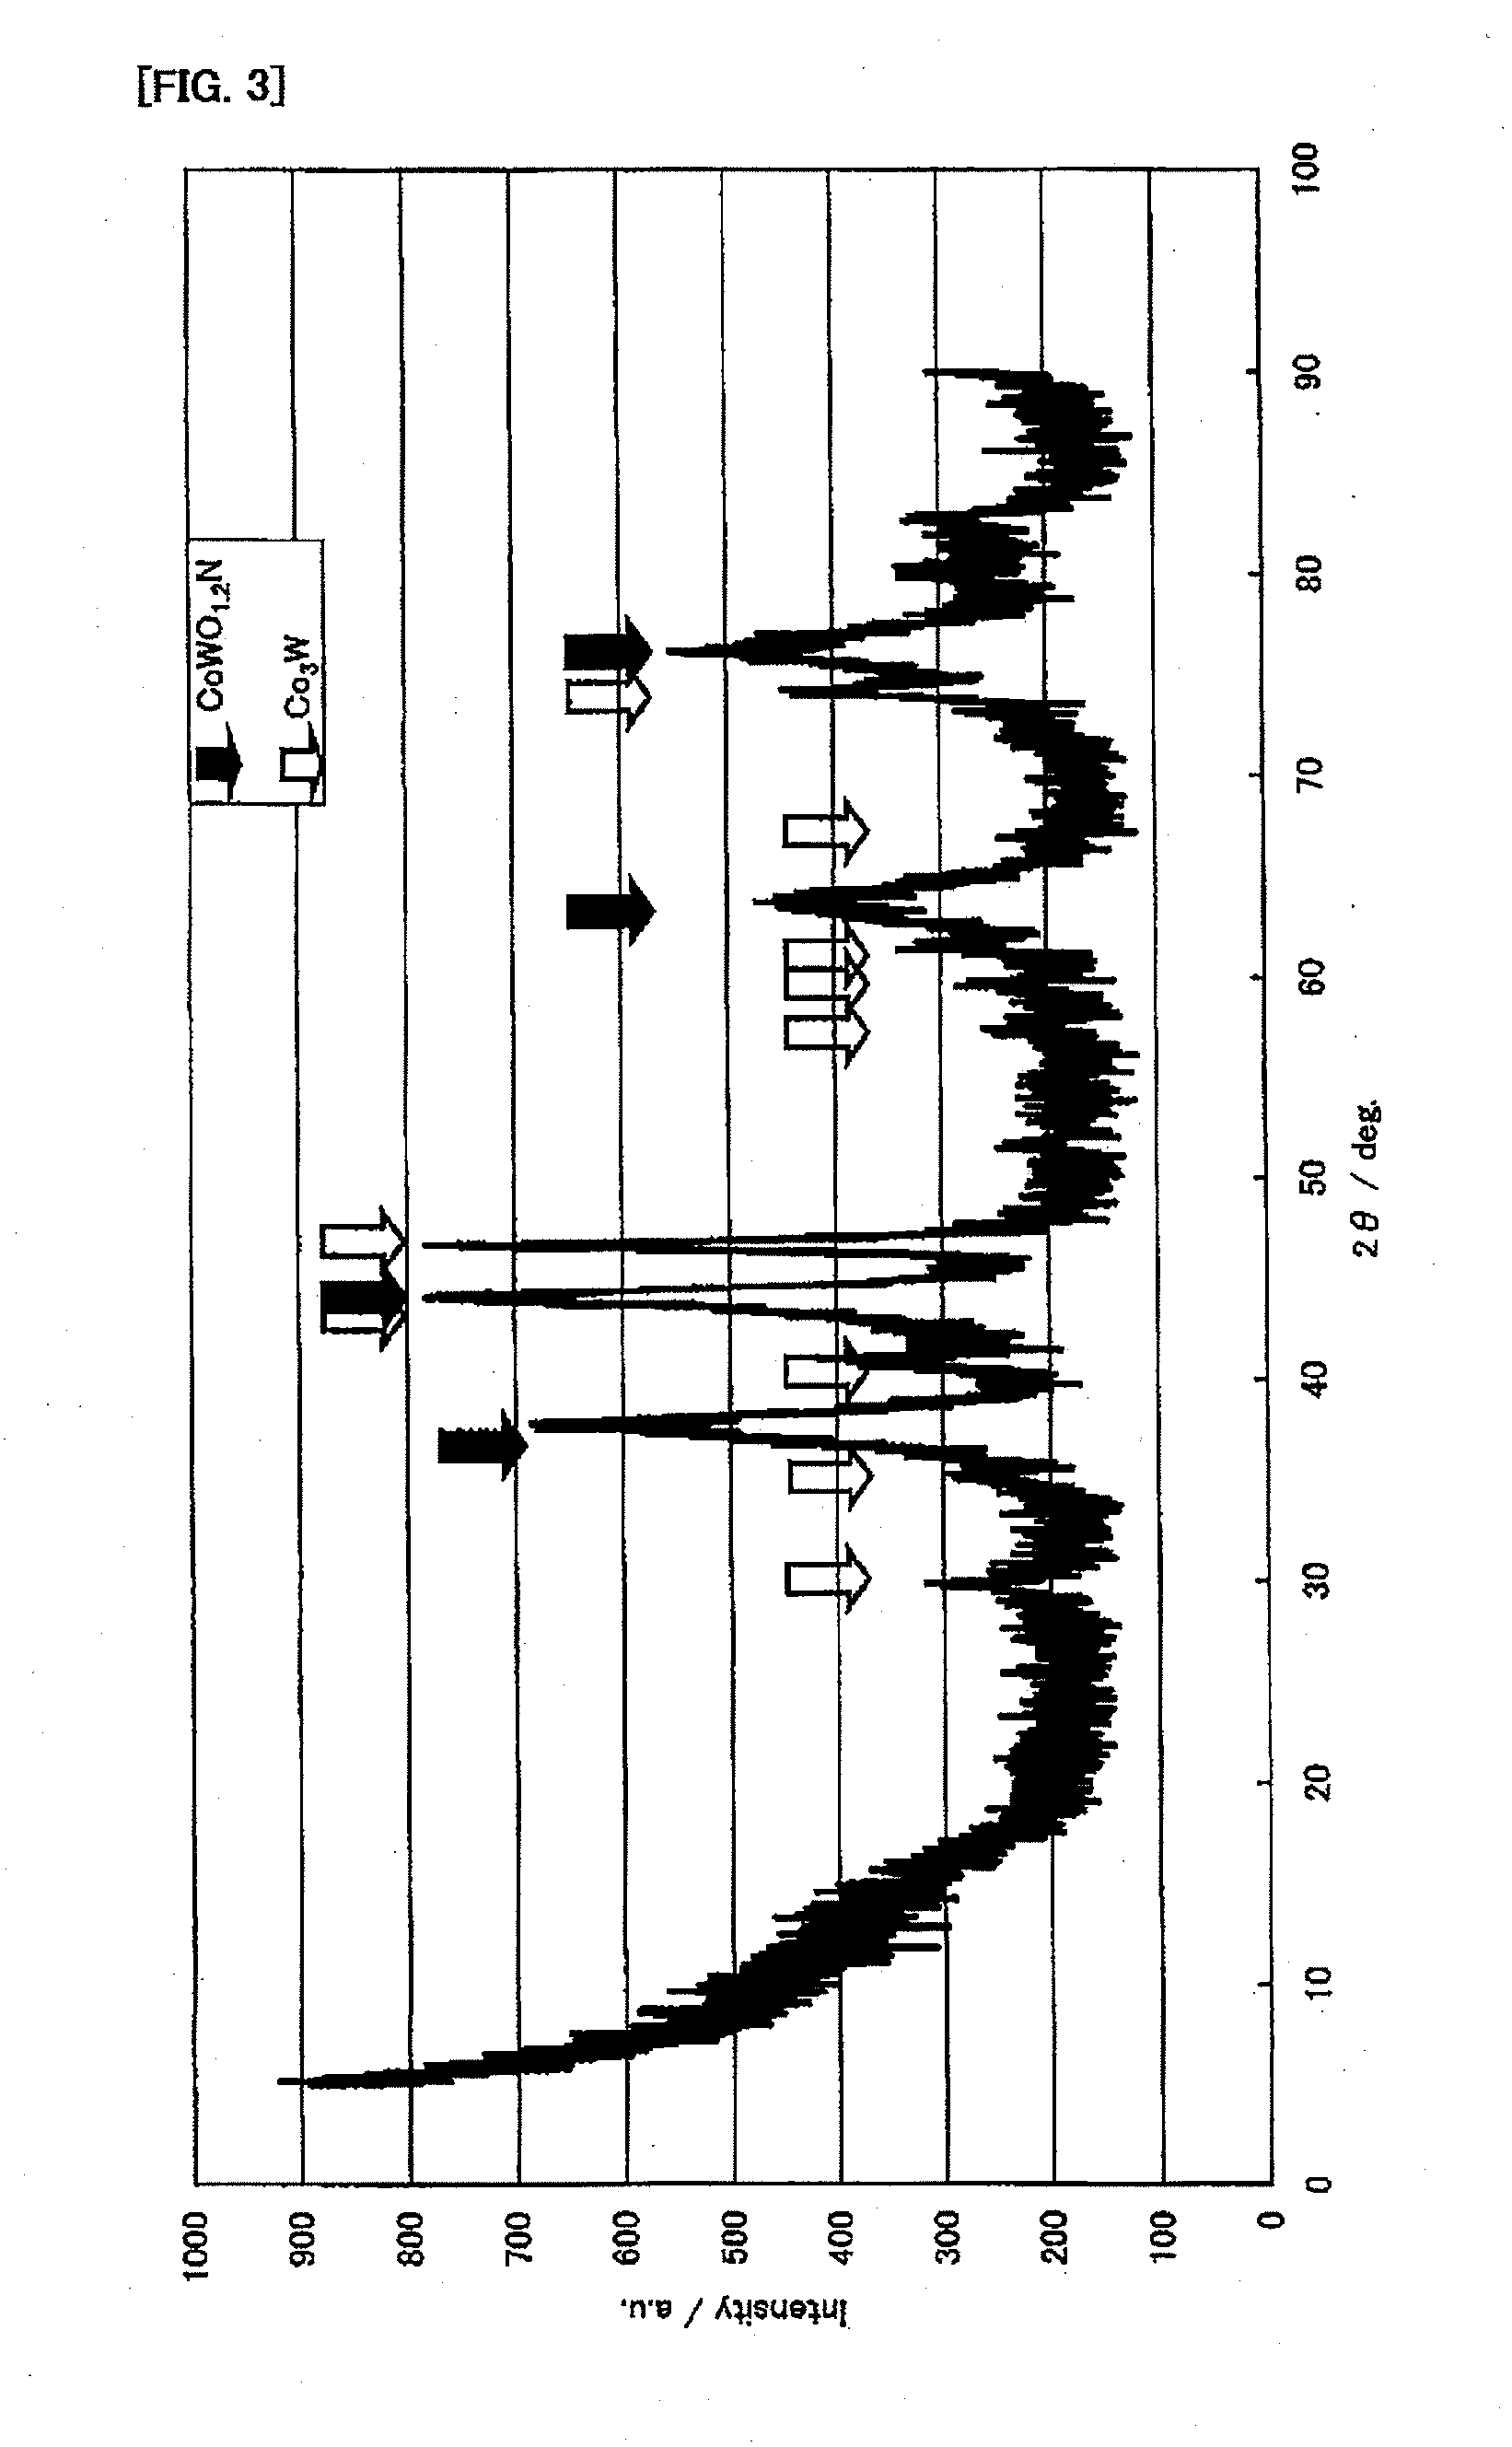 Ammonia decomposition catalysts and their production processes, as well as ammonia treatment method